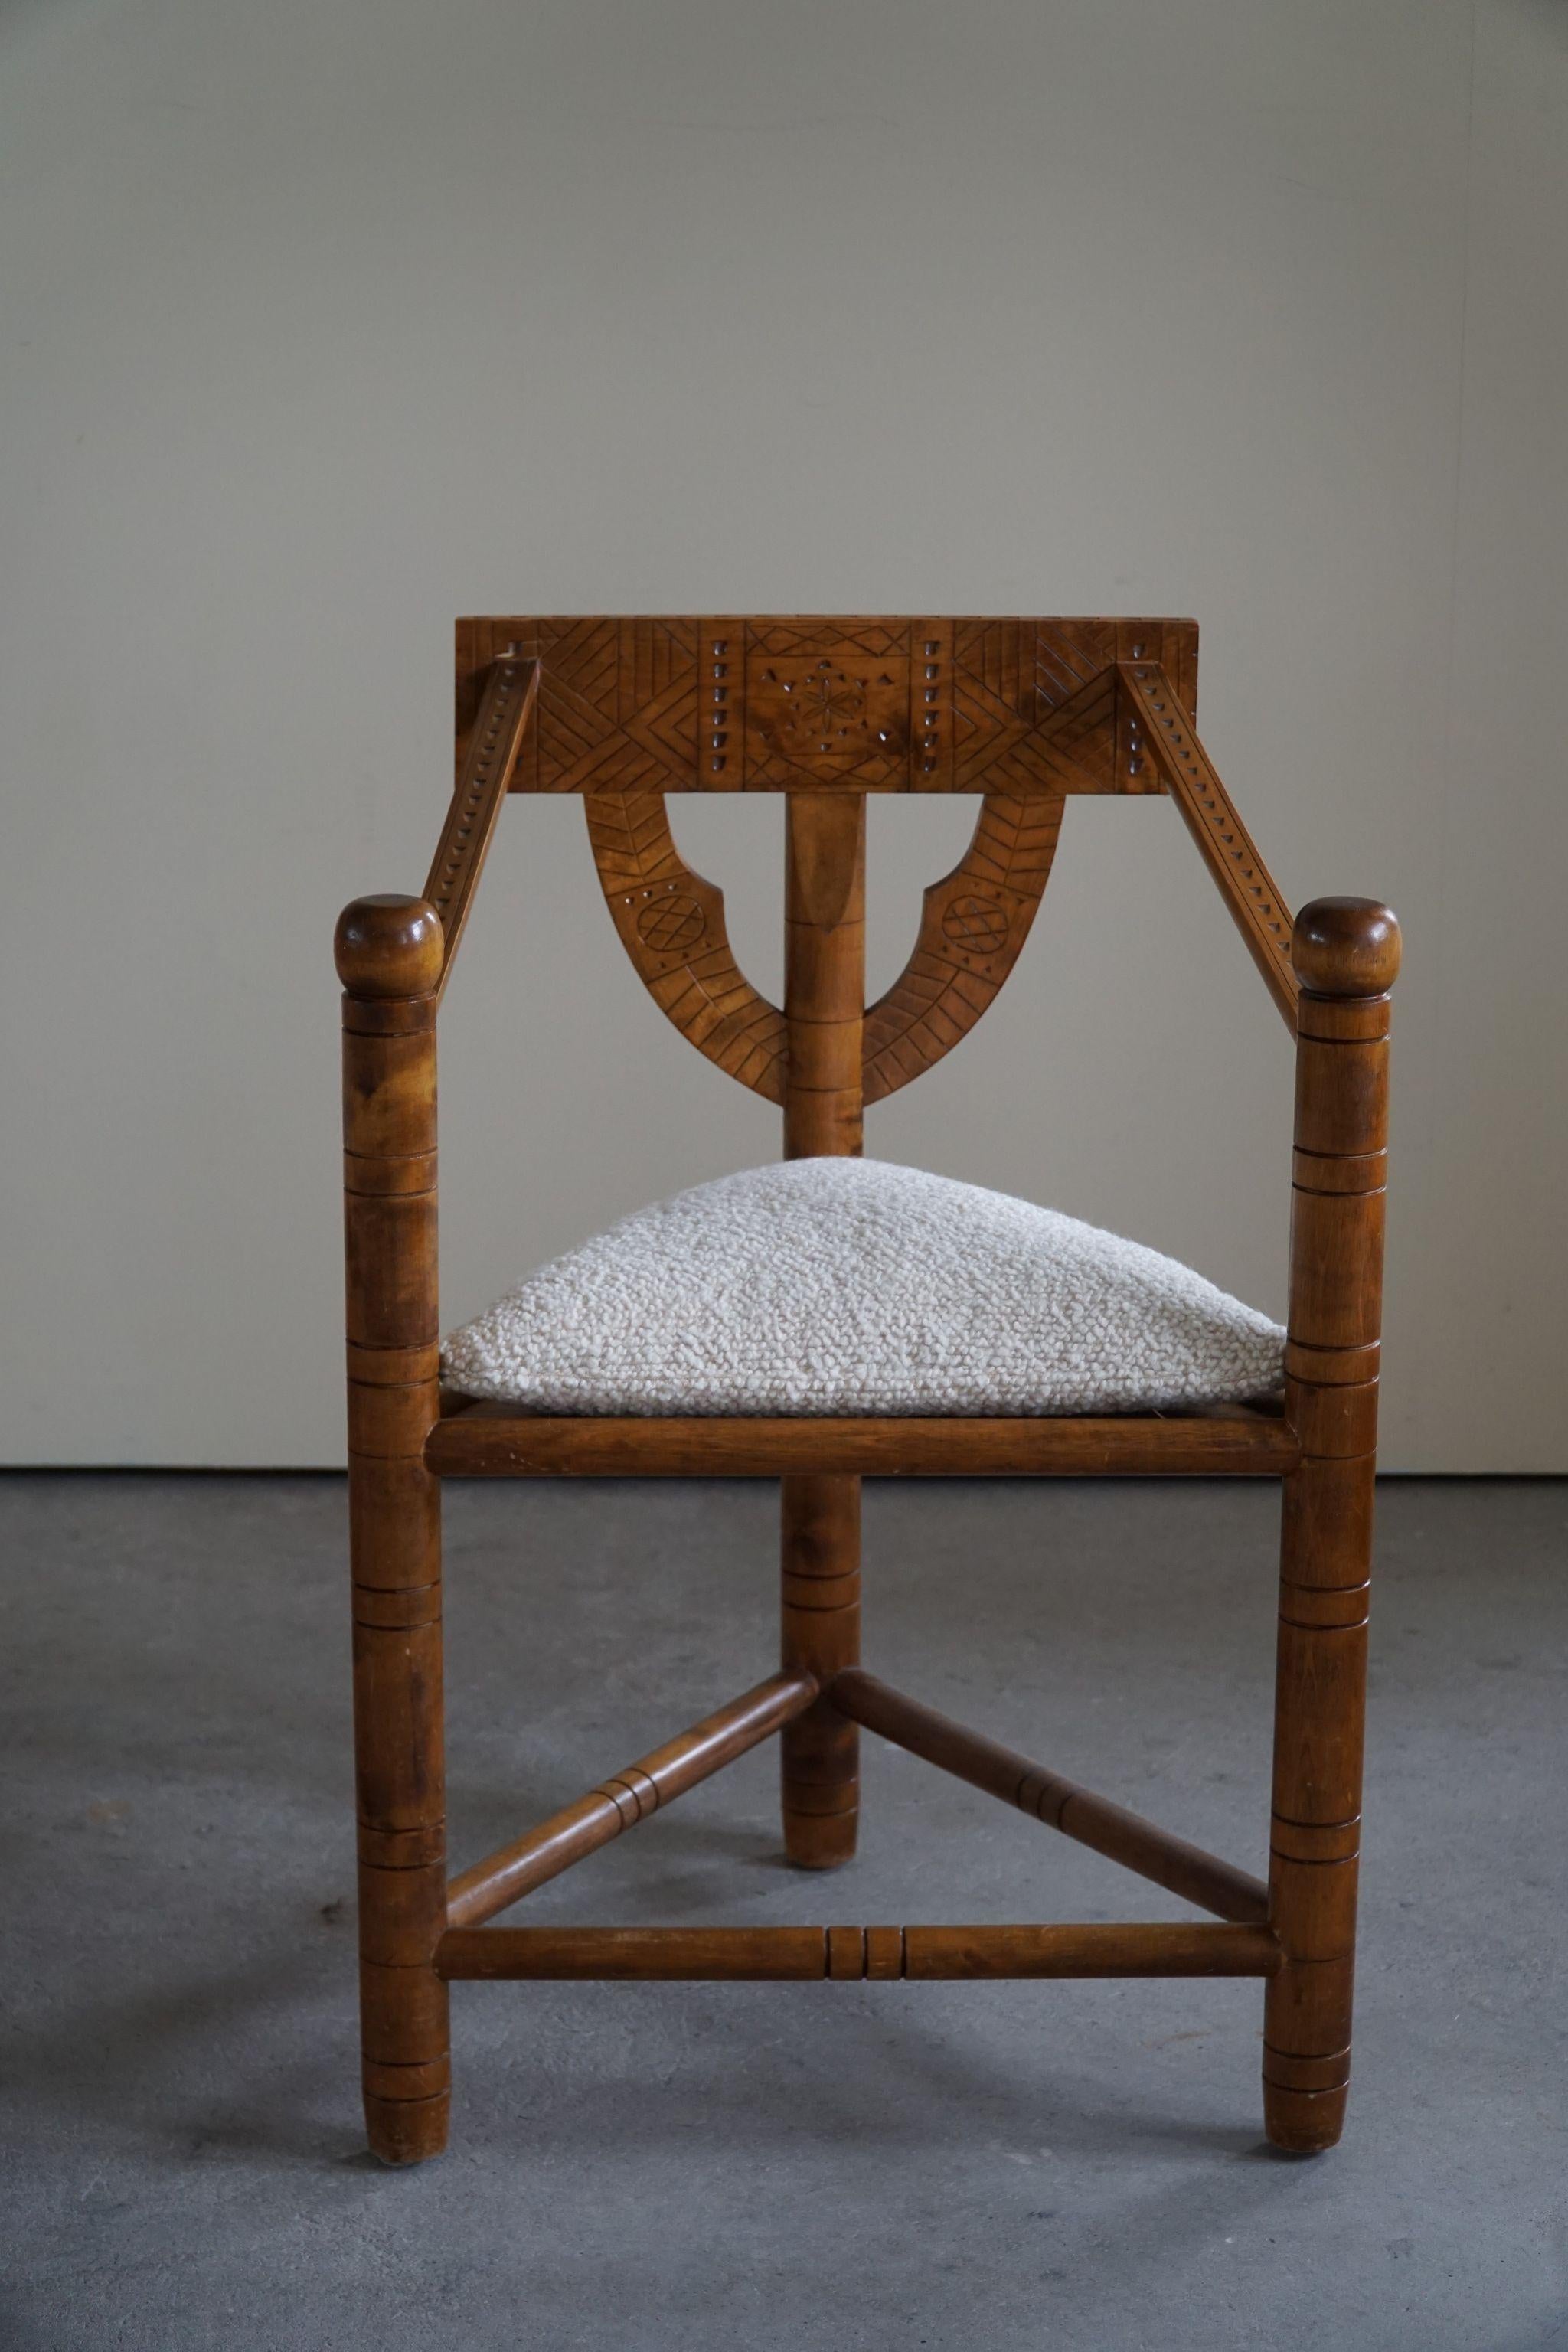 A set of 6 sculptural vintage Monk chairs made in solid oak. Carved by a Swedish cabinetmaker in the early 20th century. A truely authentic wabi sabi set in an overall good condition with a fine patina. 
Seats reupholstered in luxury Bouclé, Storr